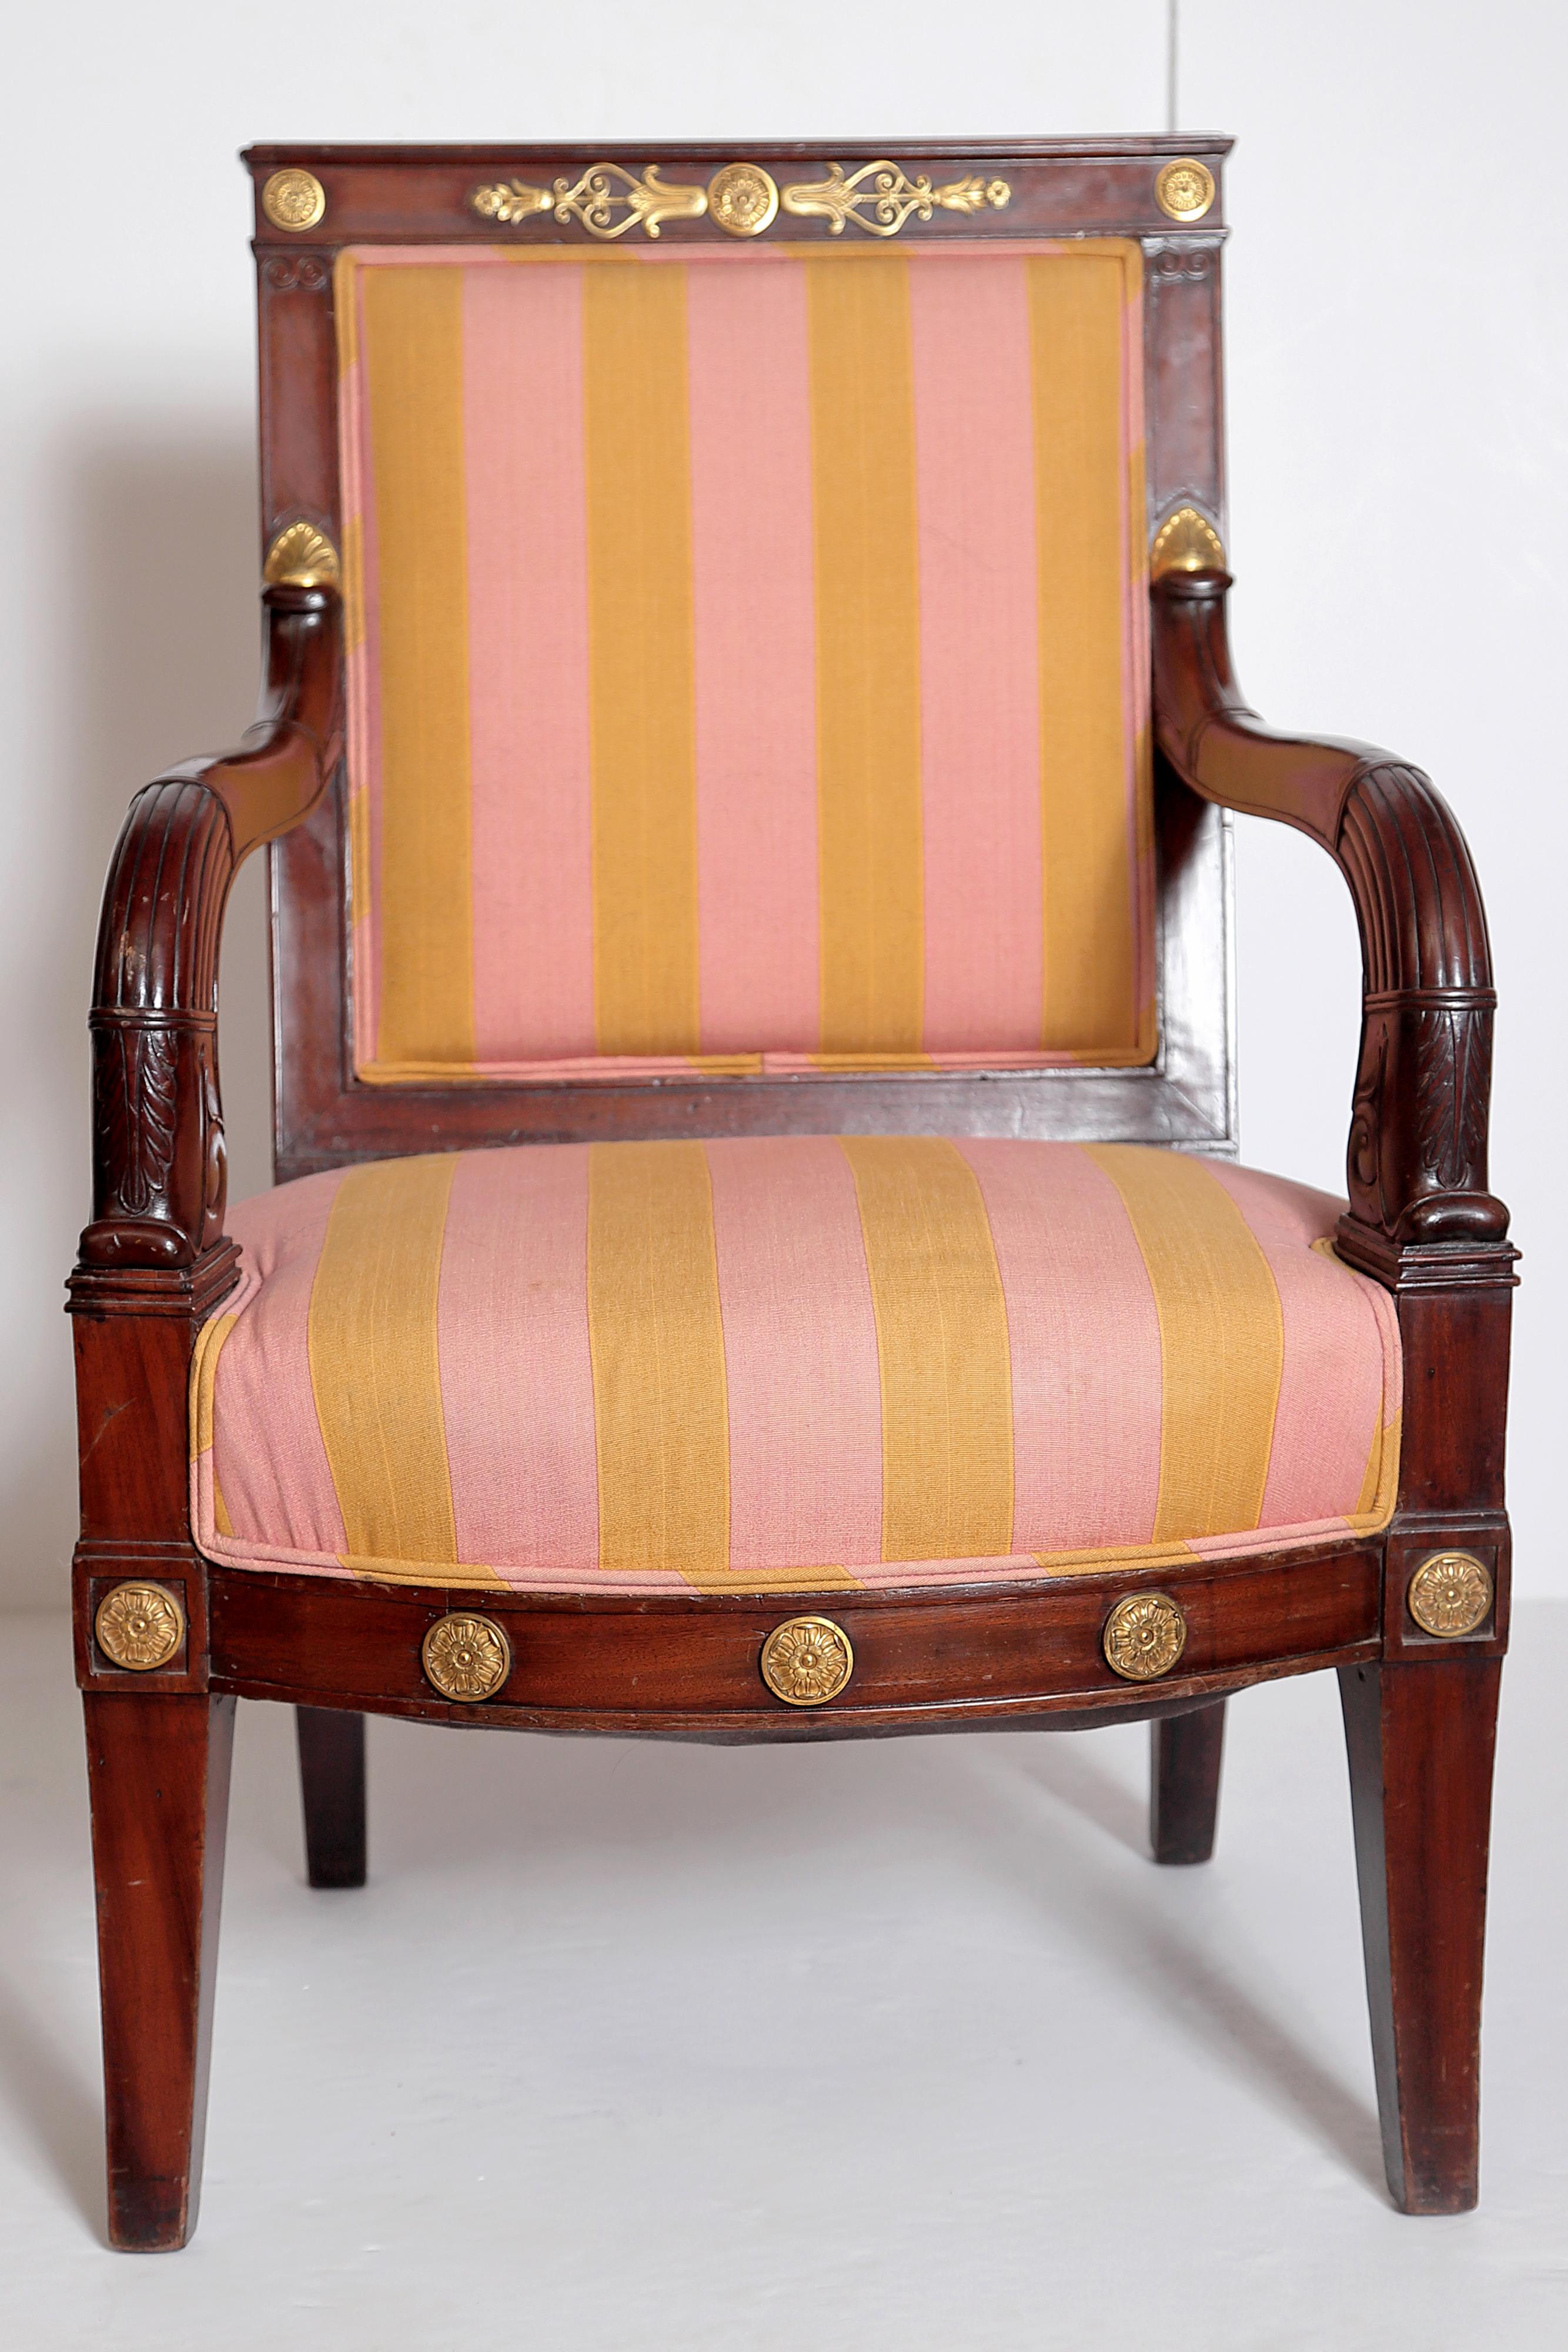 A Charles X walnut armchair / fauteuil with ribbed, curved arms, gilt bronze decoration / ornament on frame, straight legs, upholstered in a dusty rose and gold striped fabric

Measures: seat height 17